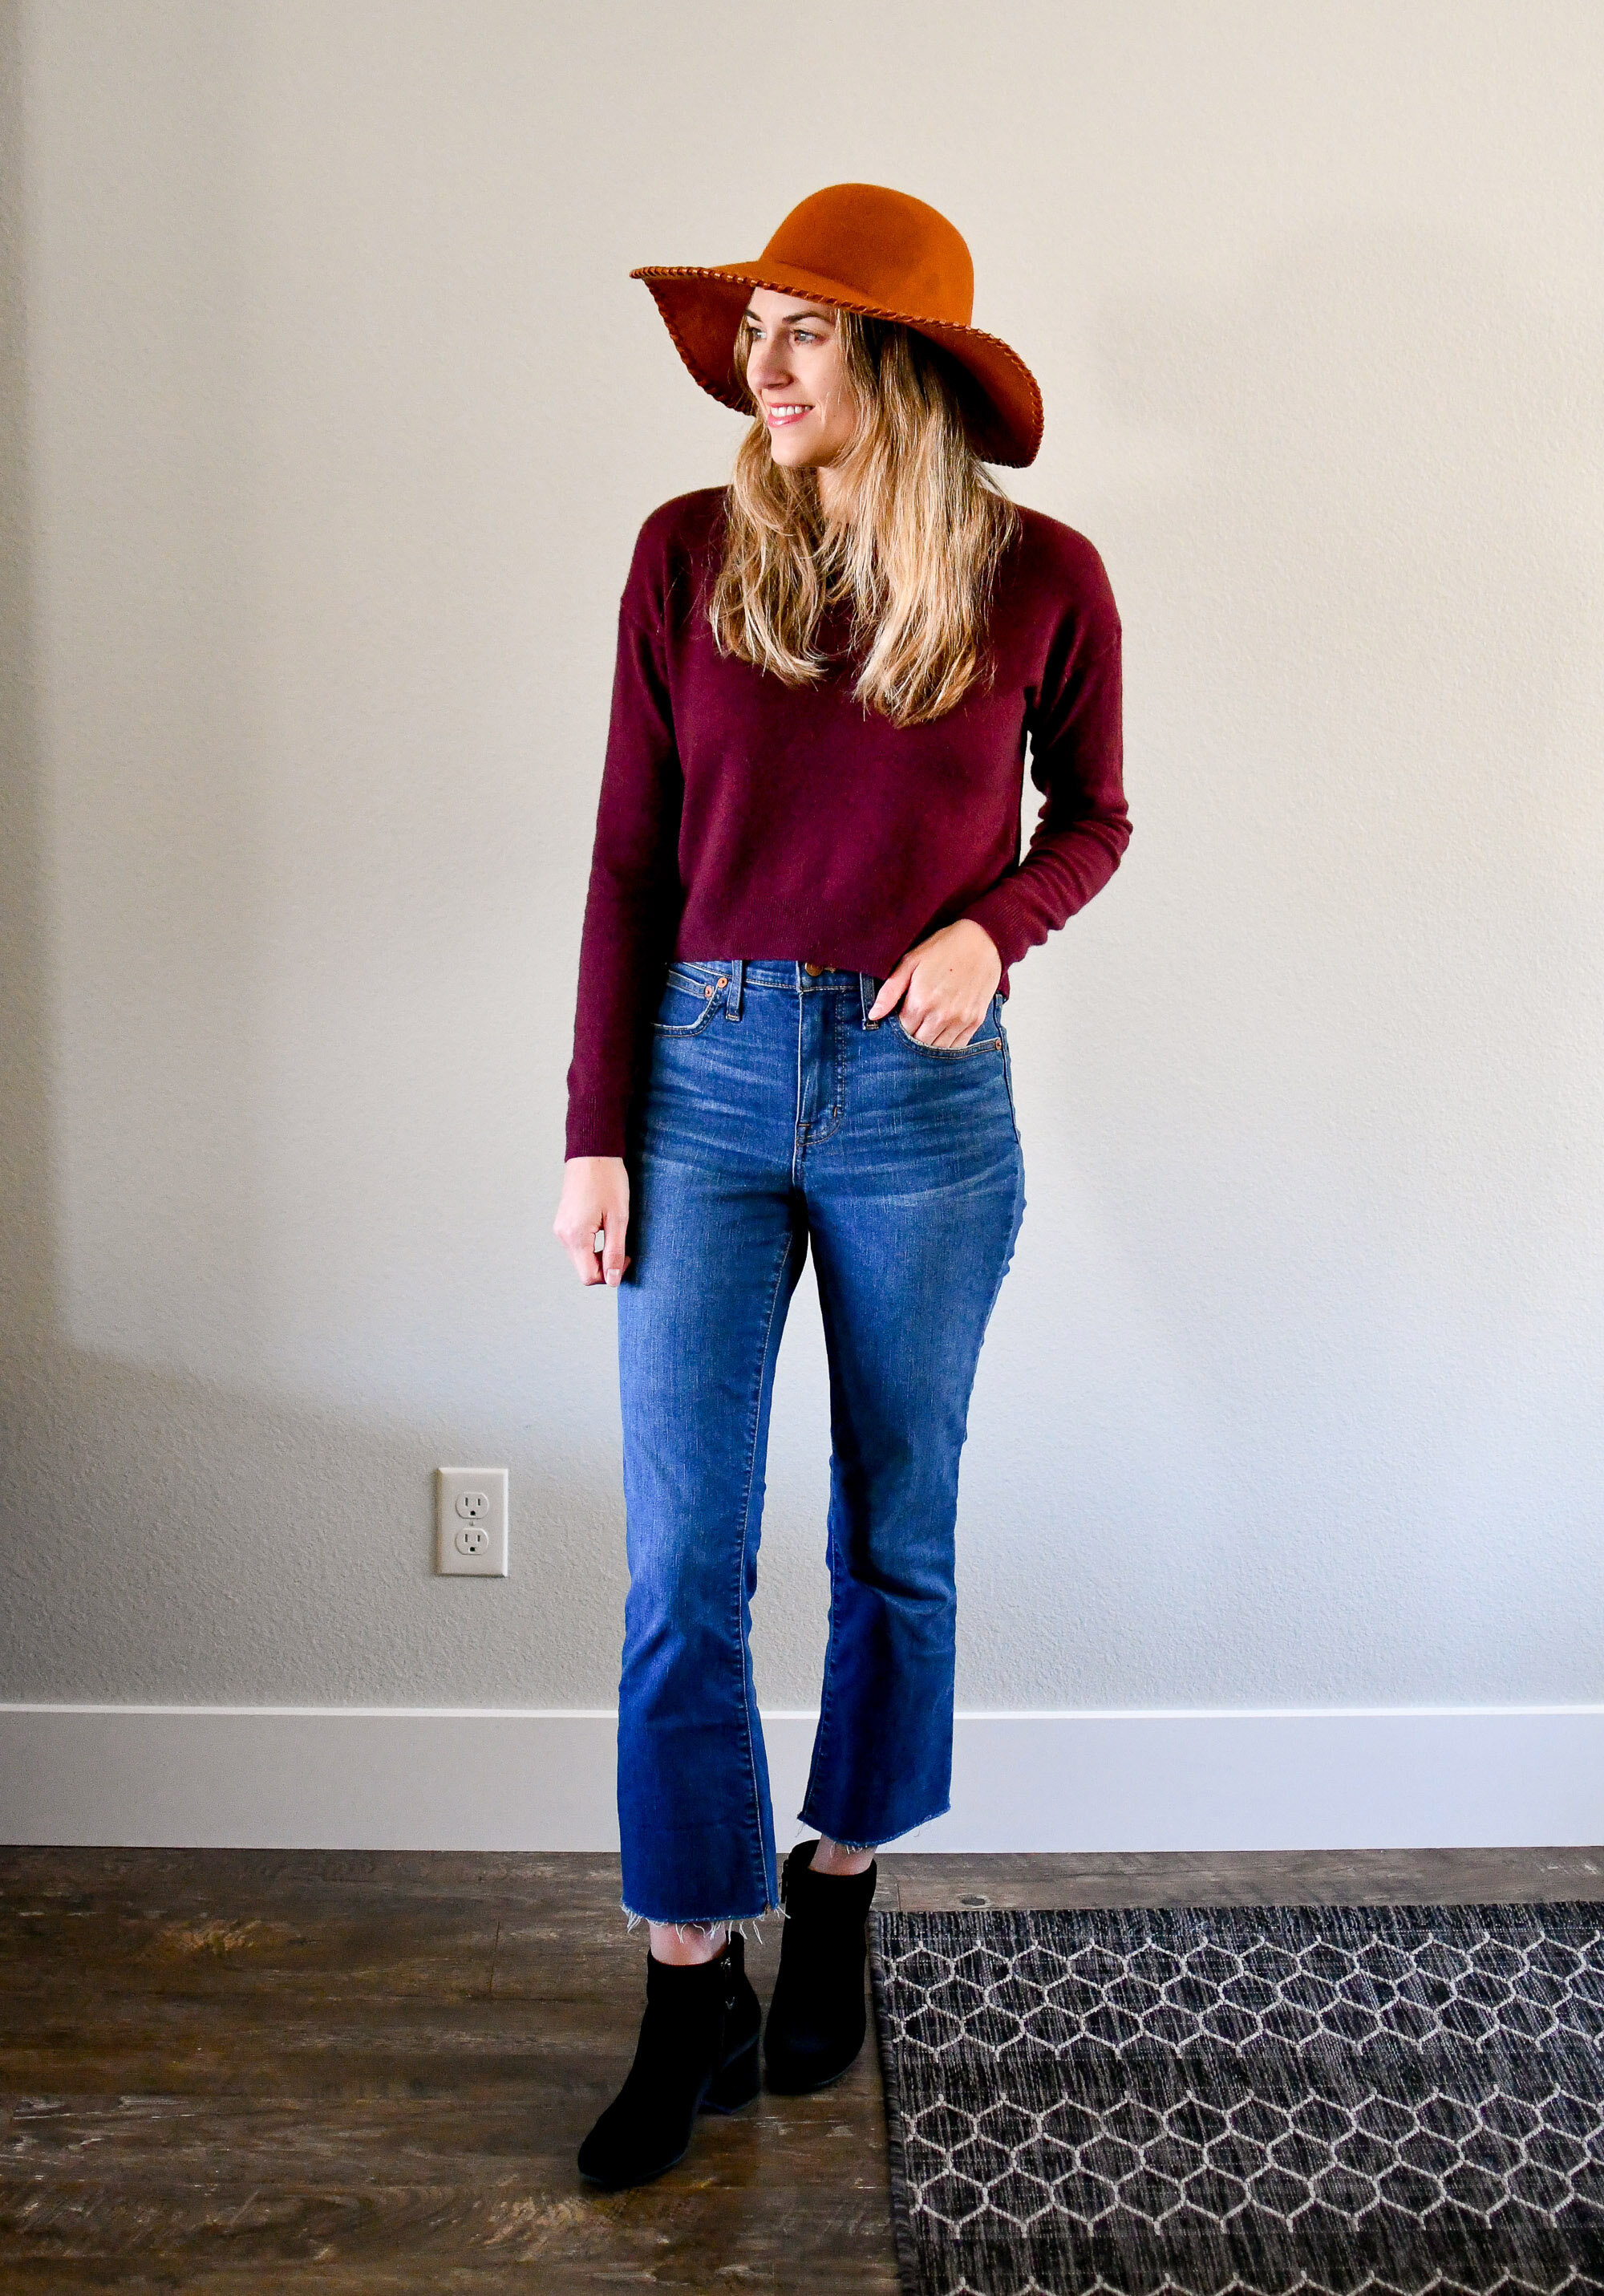 Best purchase: Madewell Cali demi-boot jeans in Preston wash — Cotton Cashmere Cat Hair